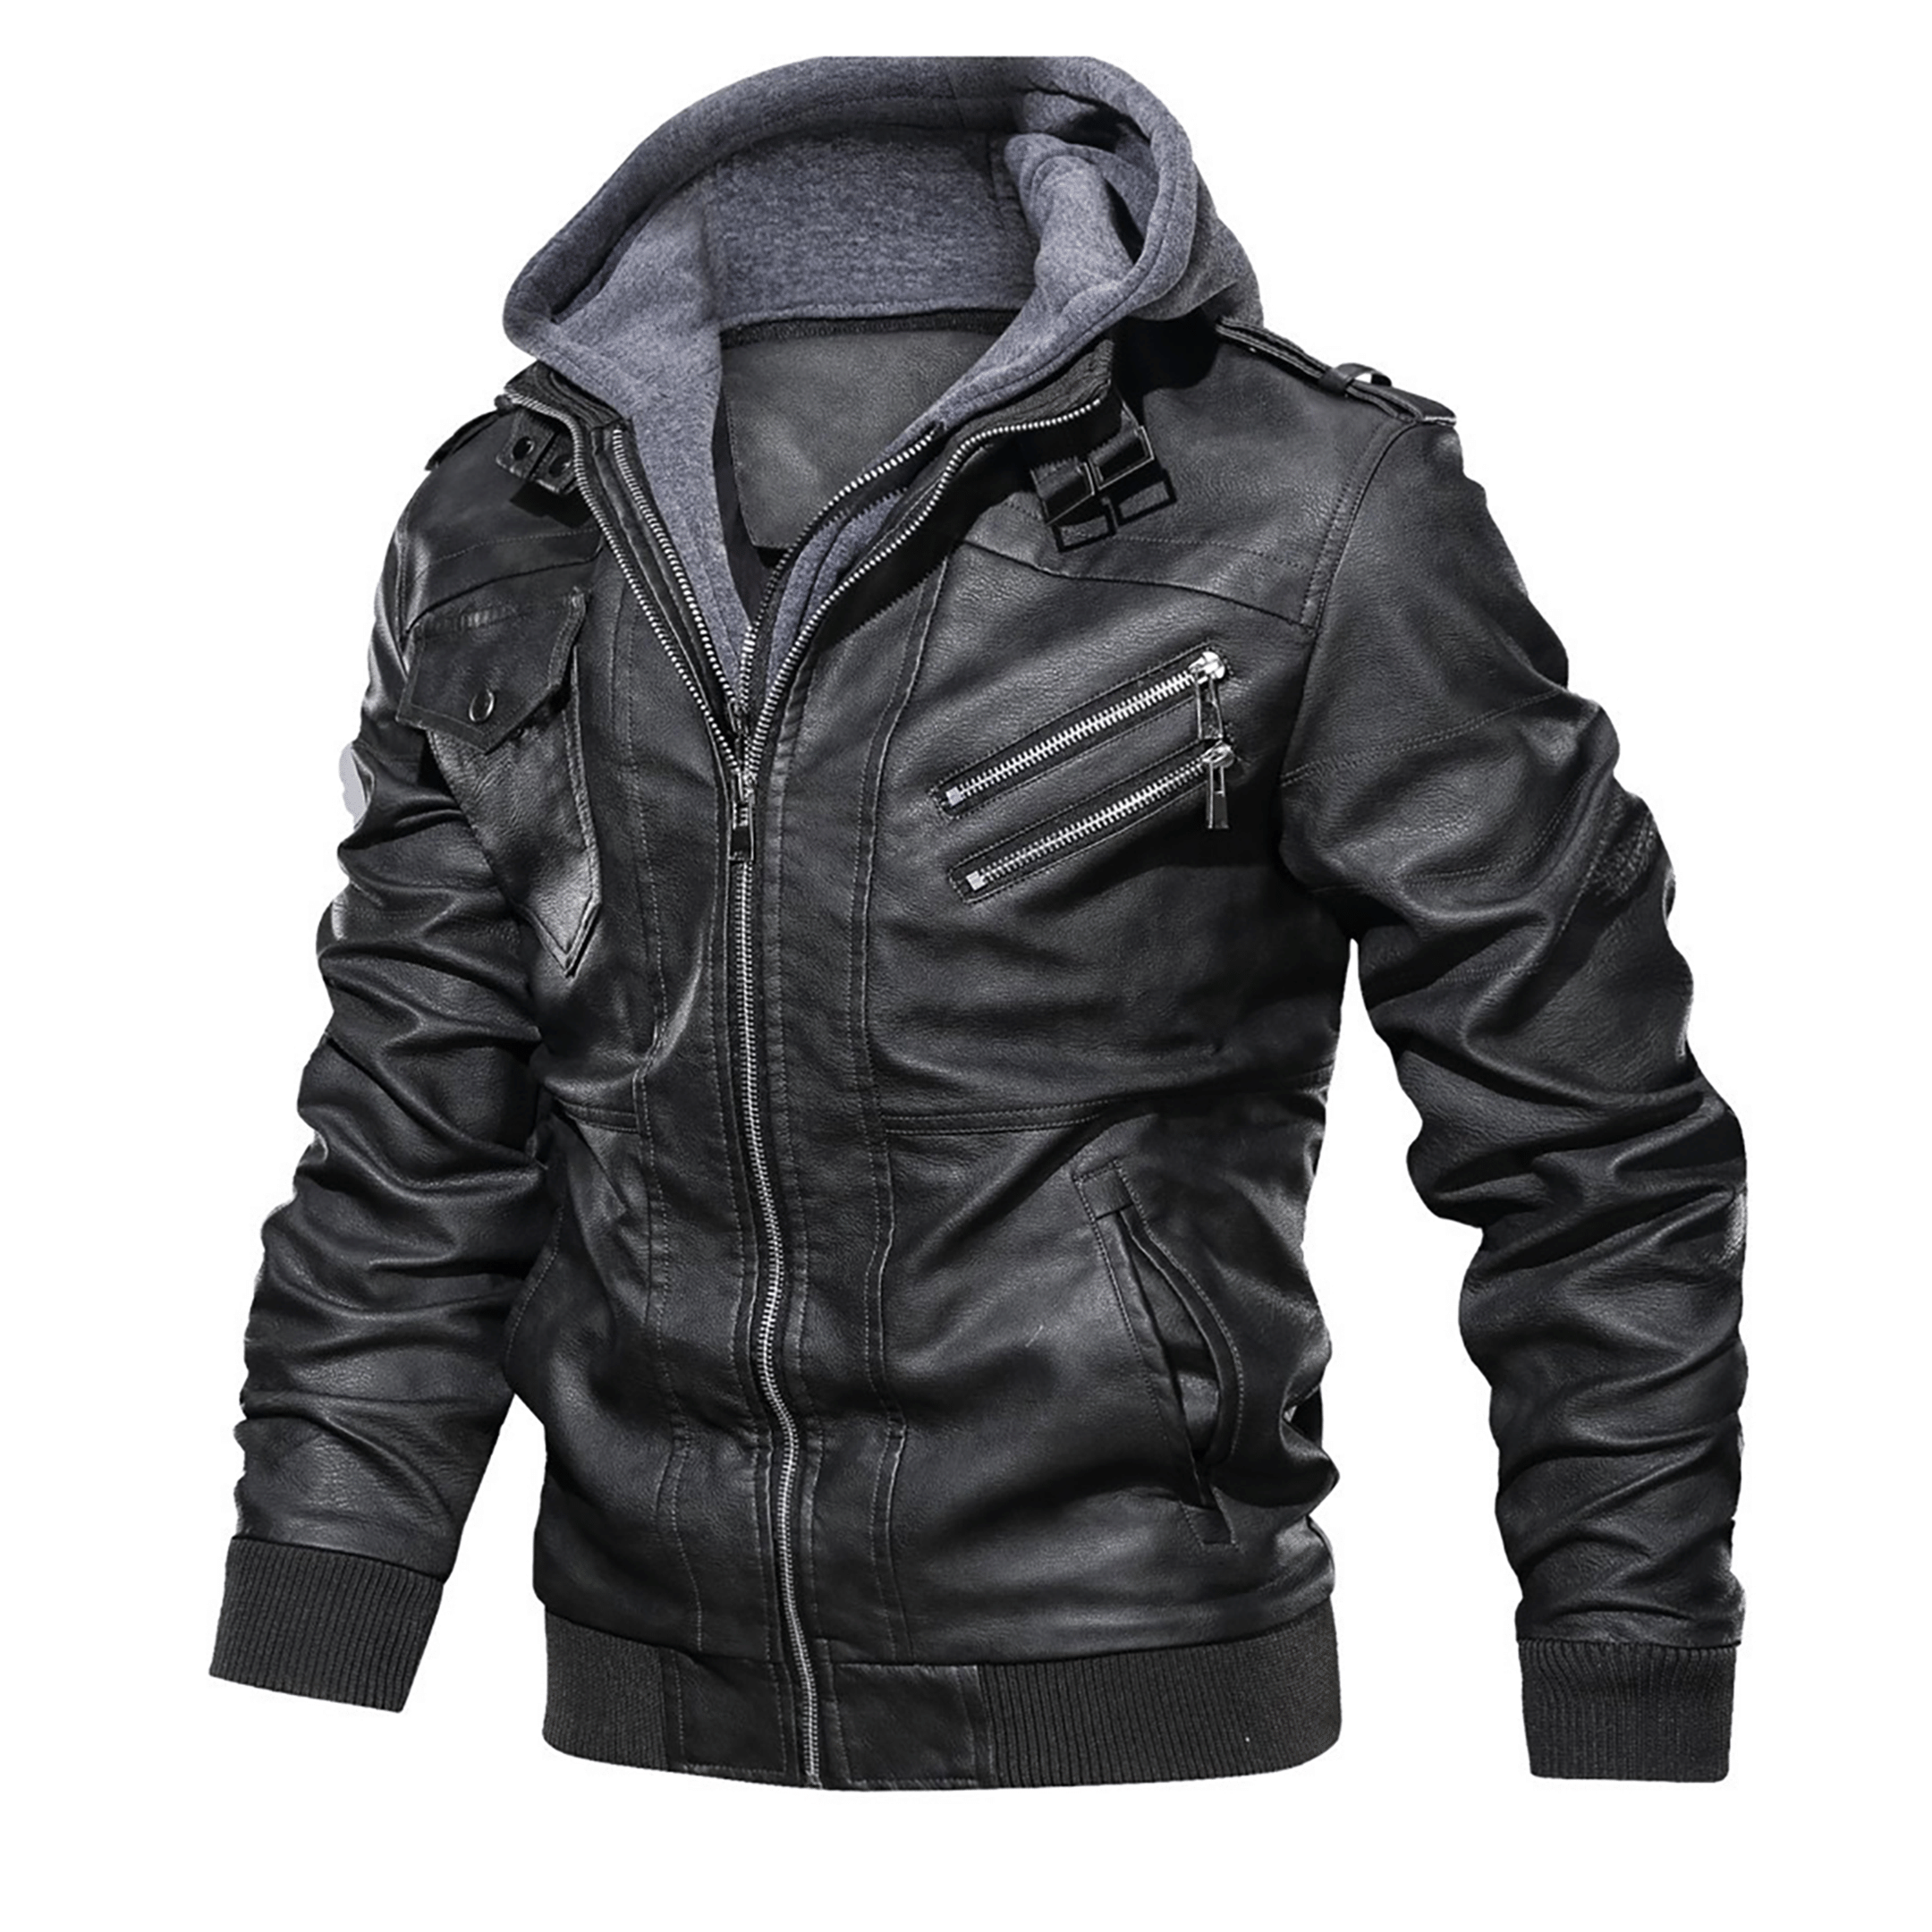 Top leather jackets and latest products 179